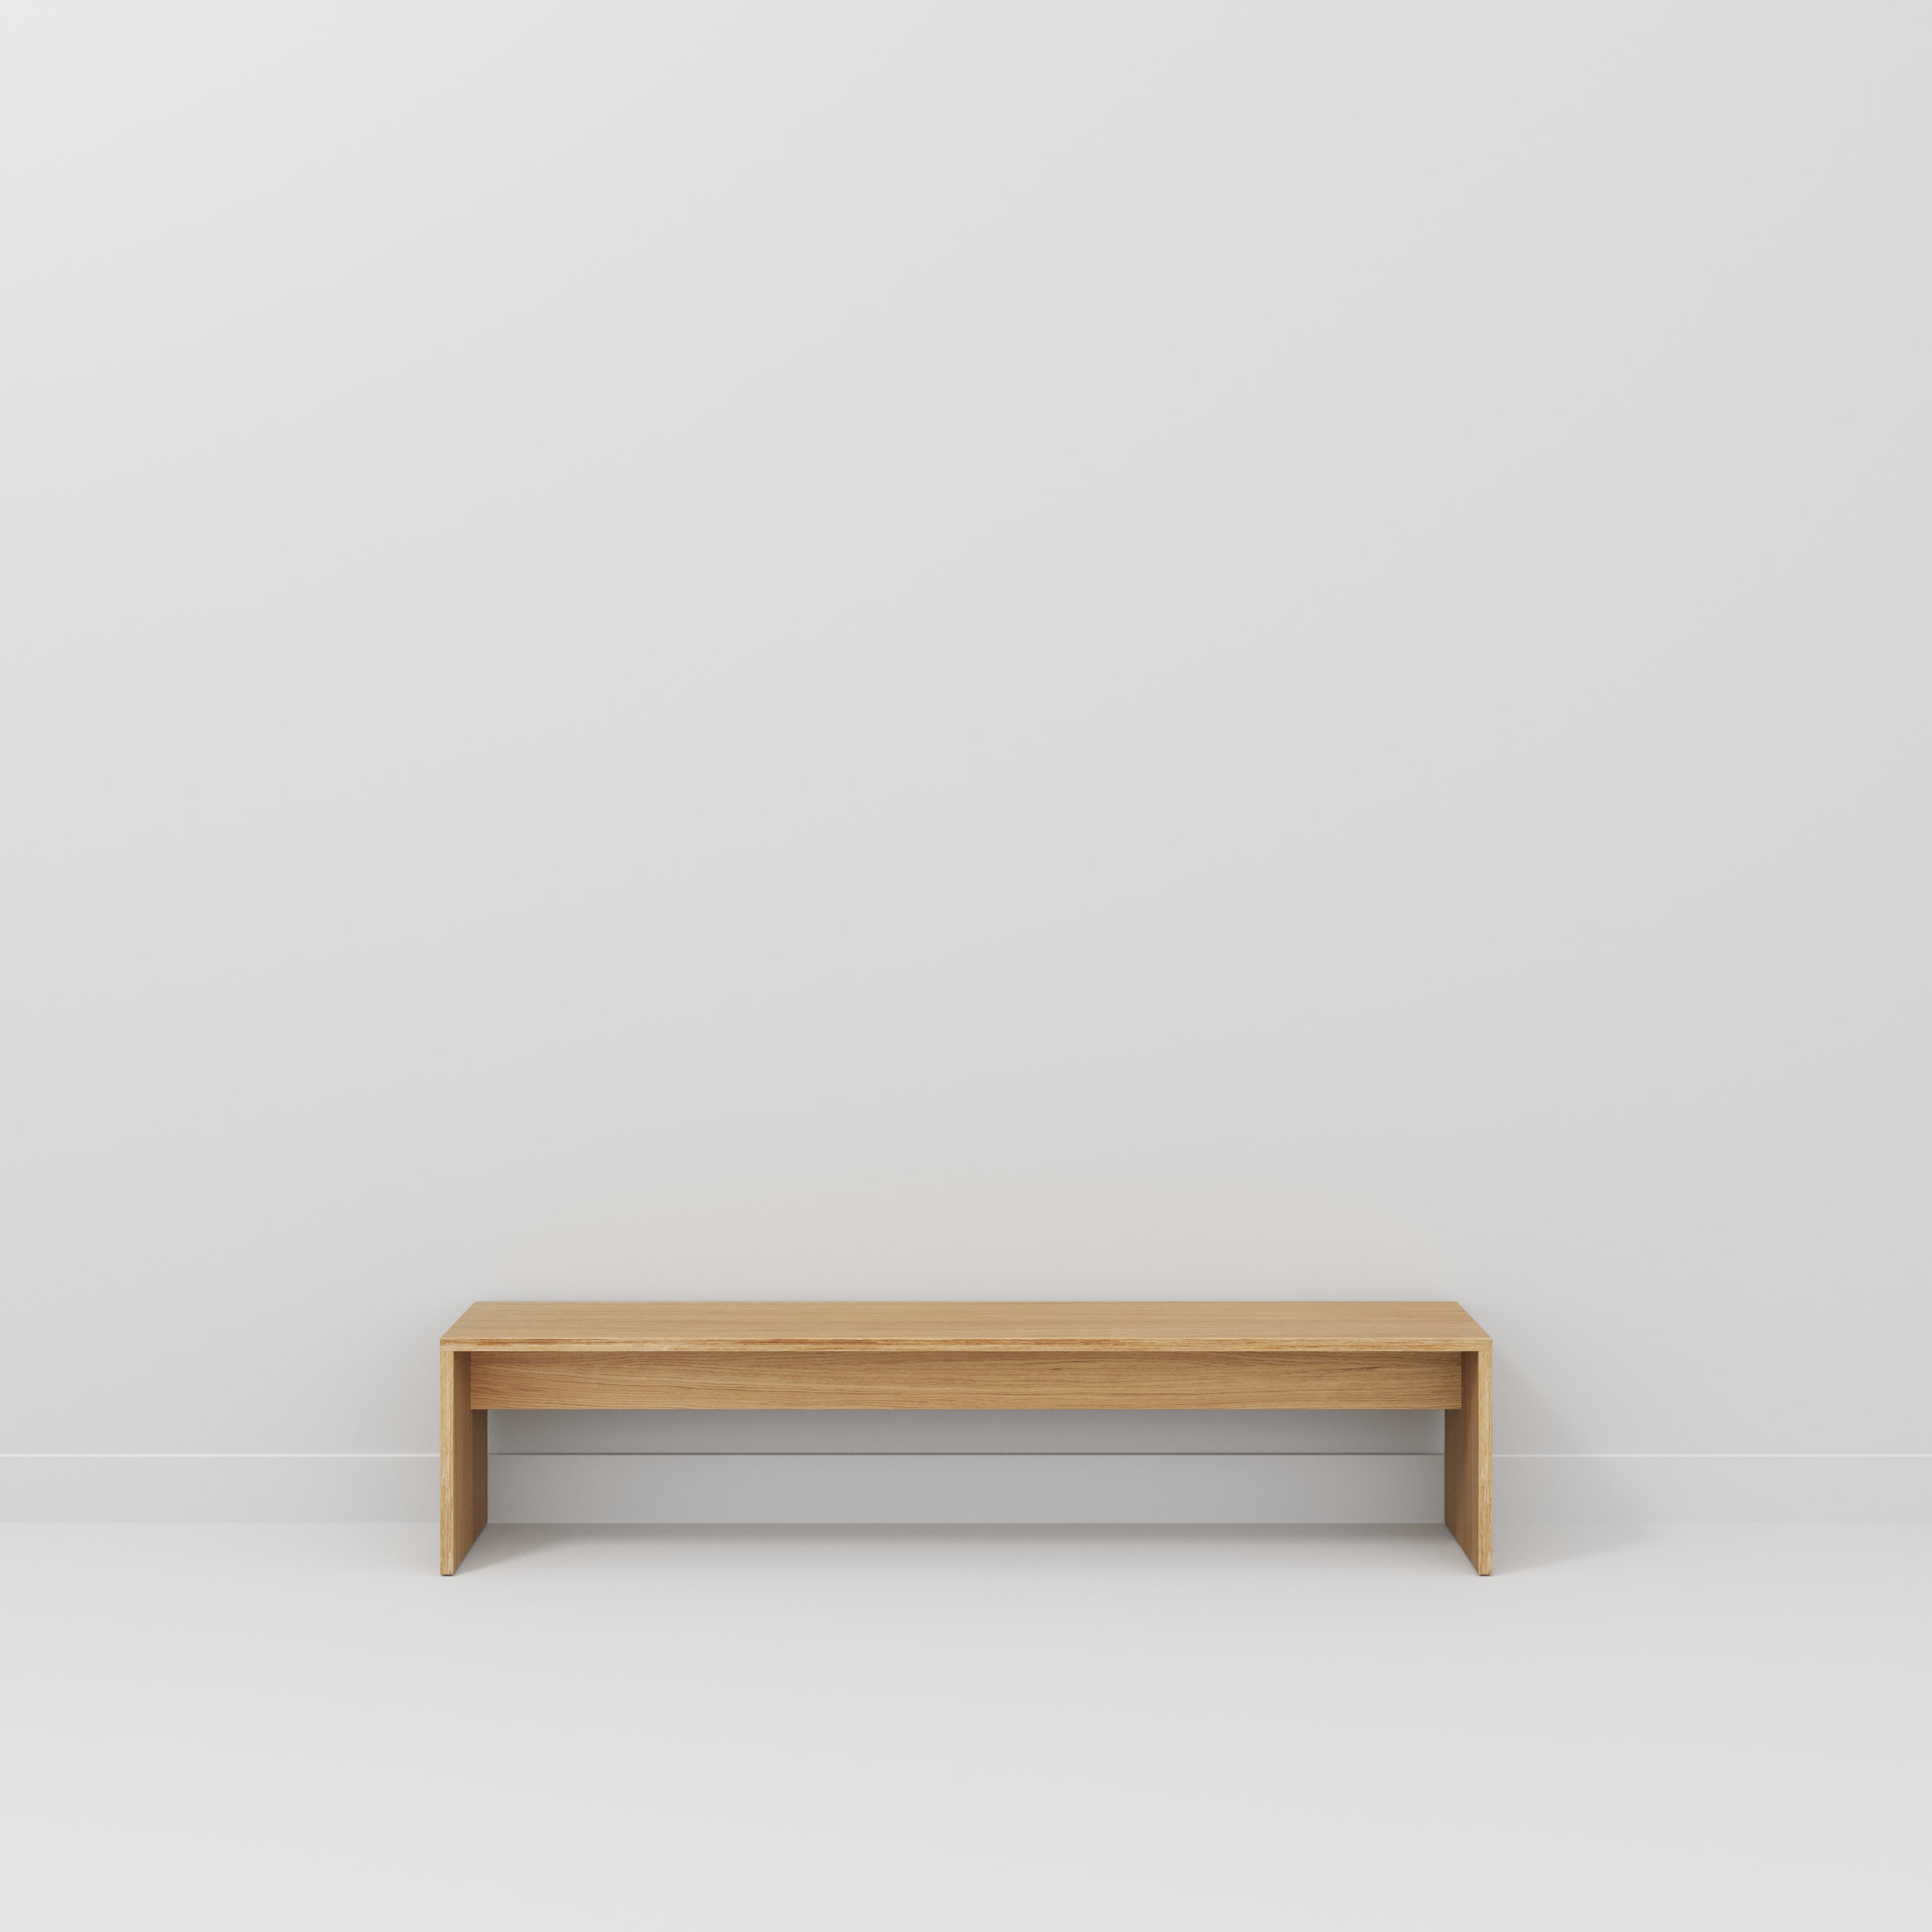 Bench Seat with Solid Sides - Plywood Oak - 2000(w) x 400(d)